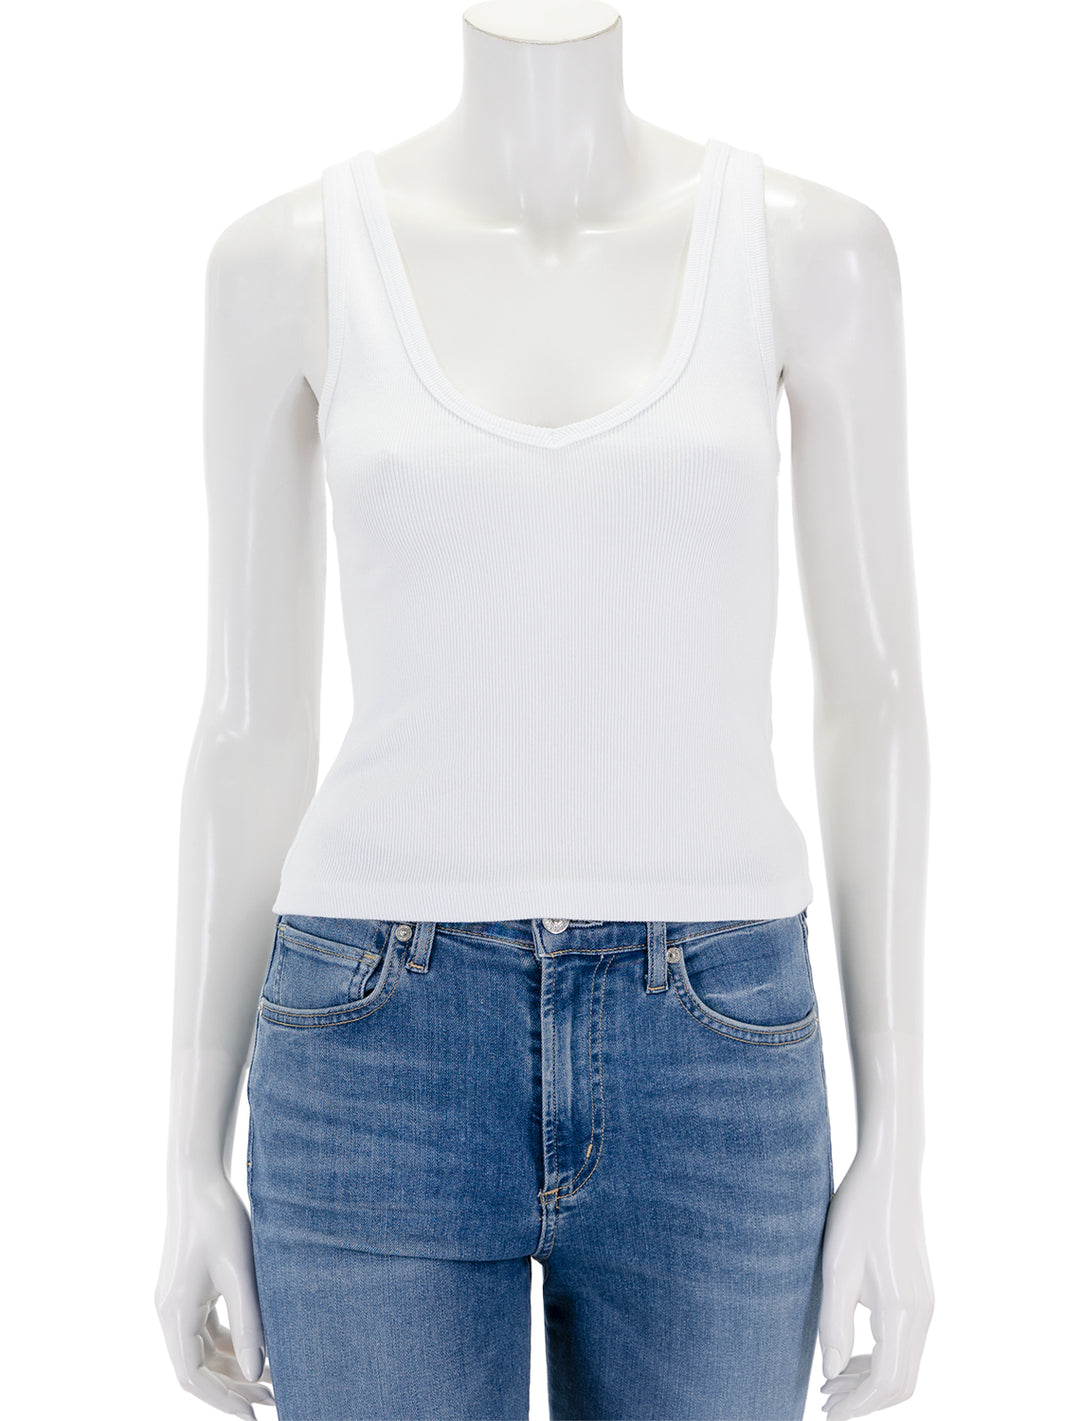 Front view of Perfectwhitetee's maria tank in white.